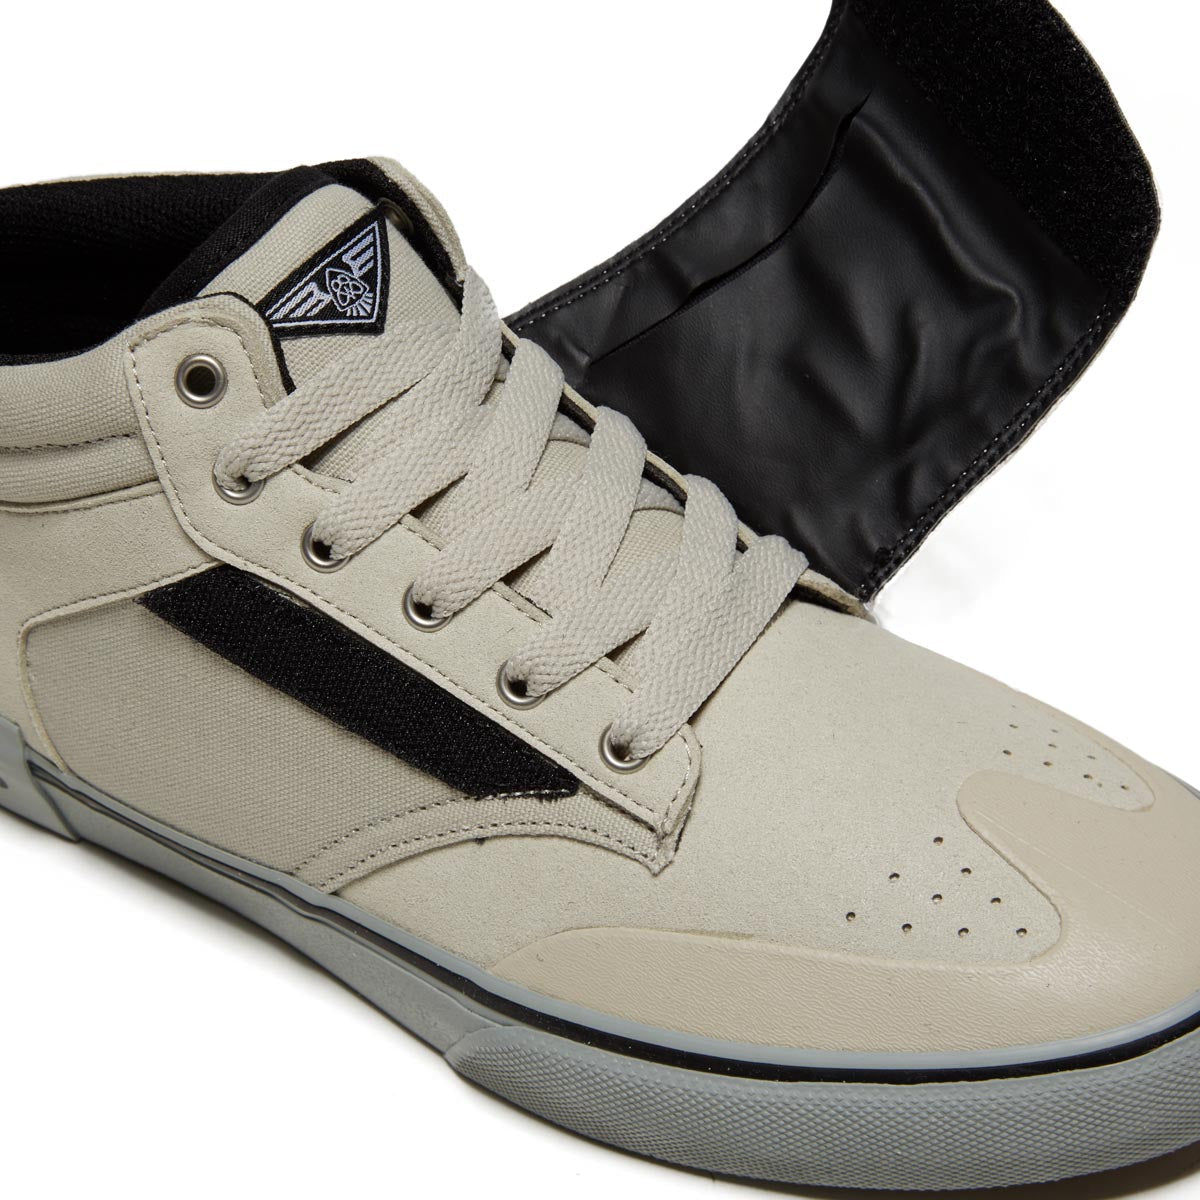 Etnies Andy Anderson Shoes - White/Grey image 5